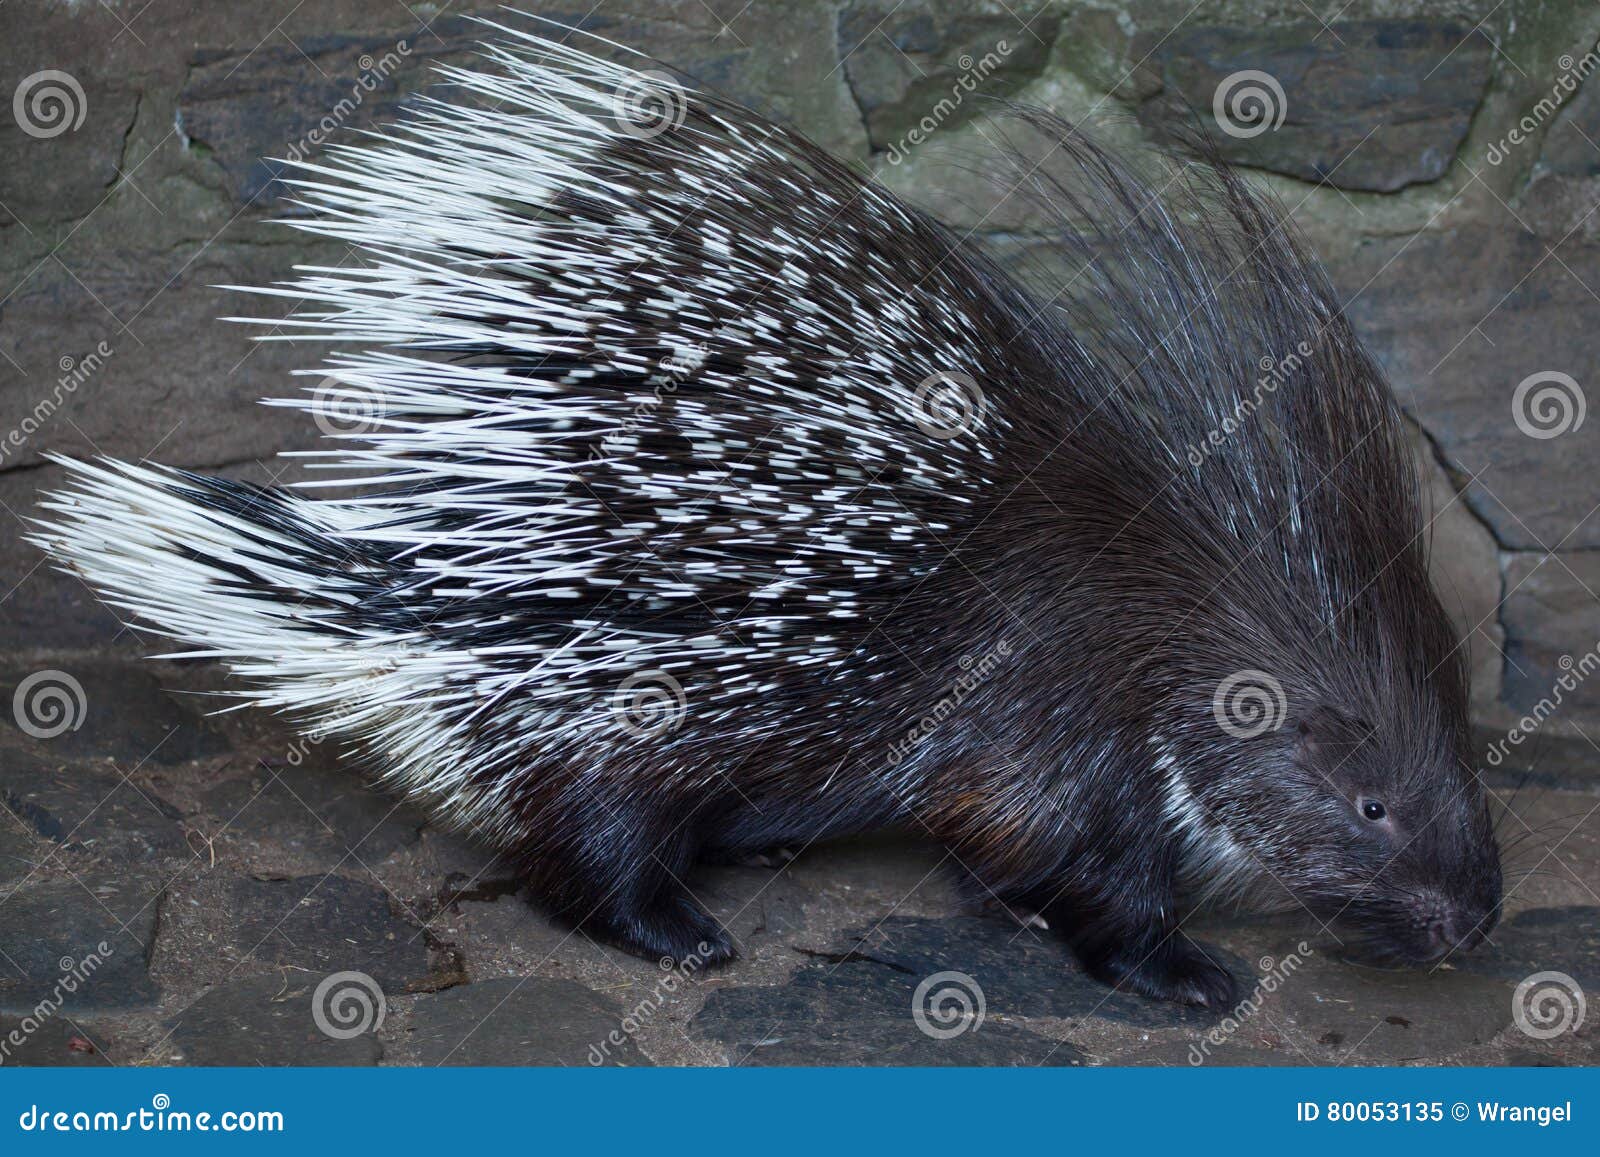 African Porcupine Quills -  Israel